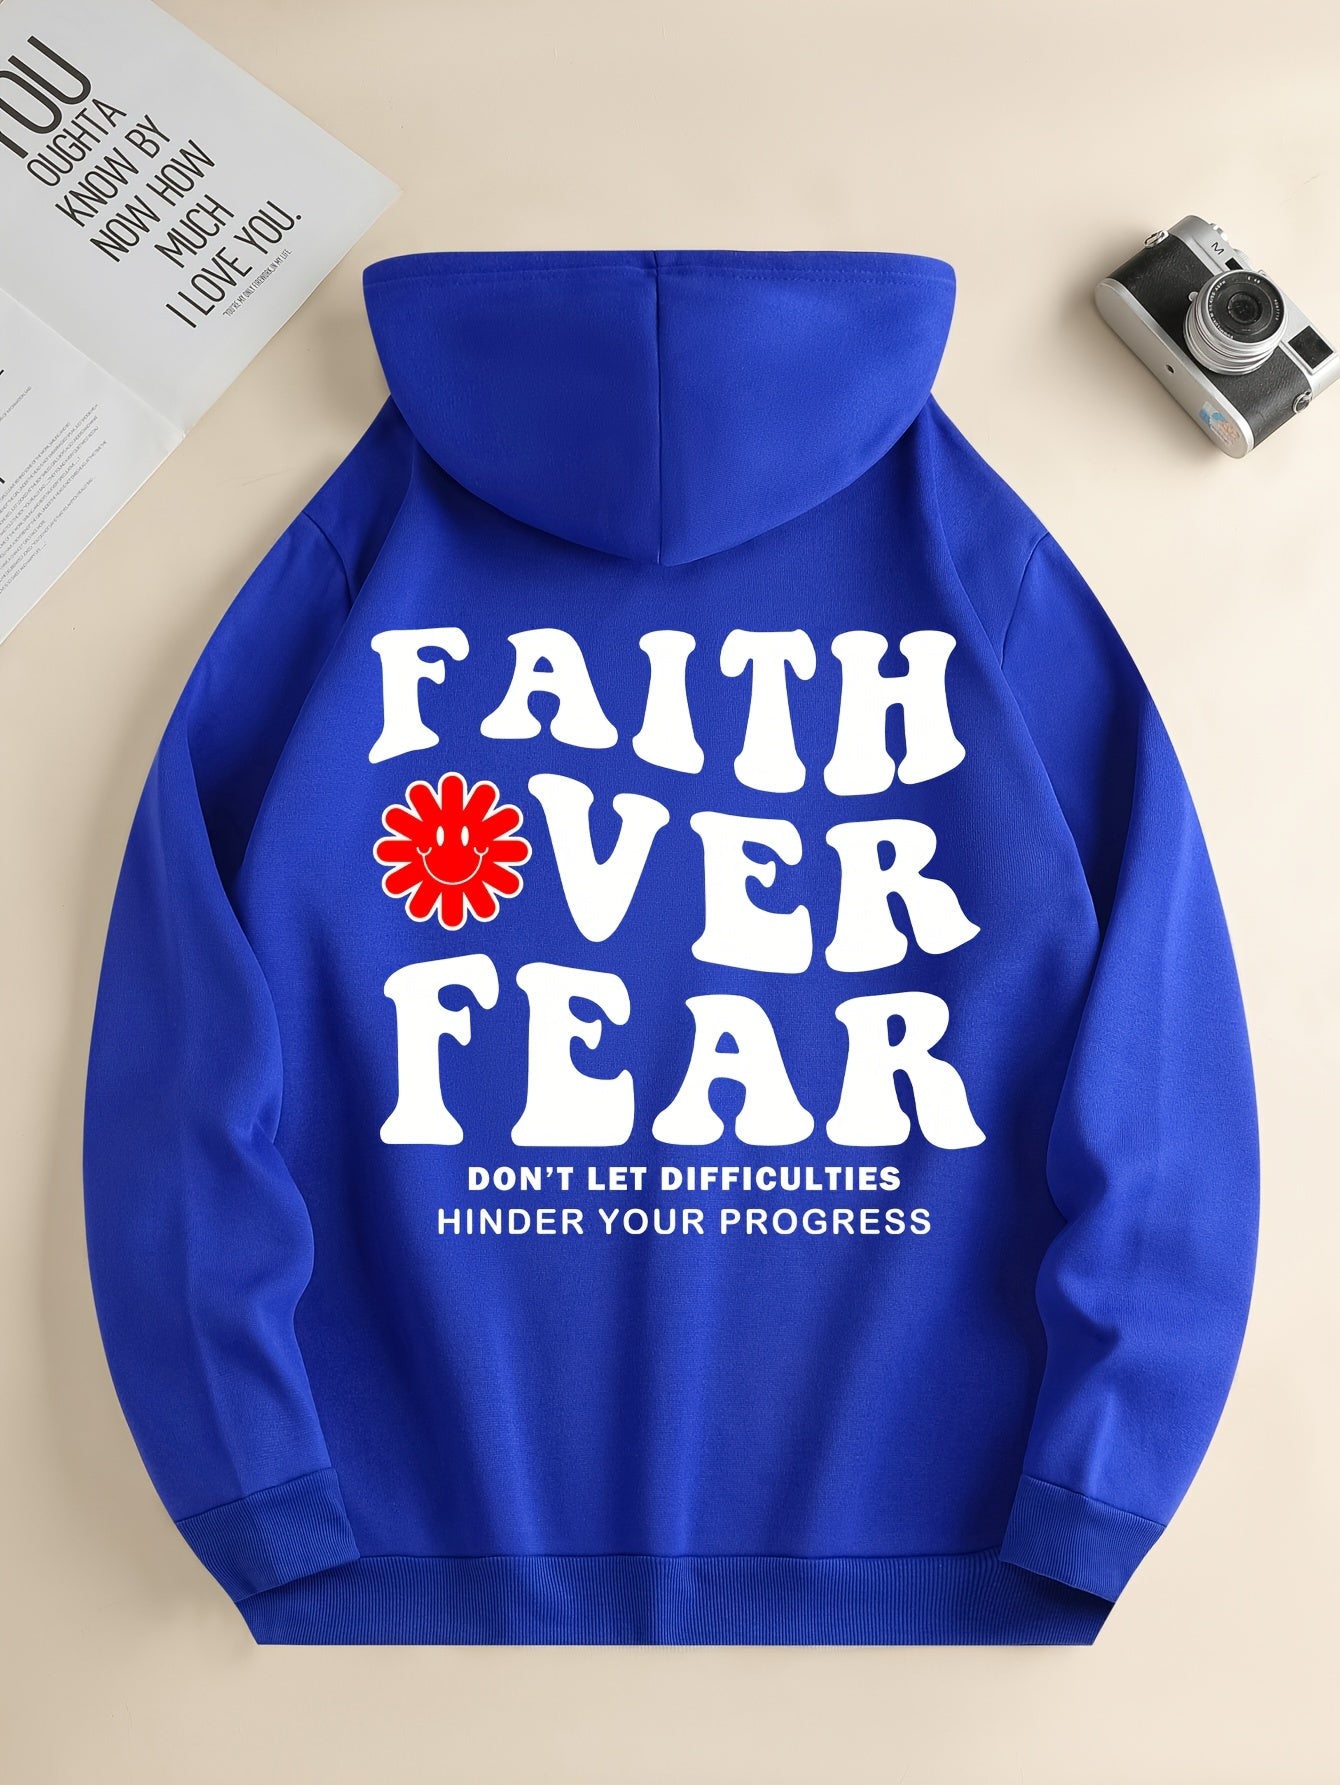 FAITH OVER FEAR: Don't Let Difficulties Hinder Your Progress Unisex Christian Pullover Hooded Sweatshirt claimedbygoddesigns